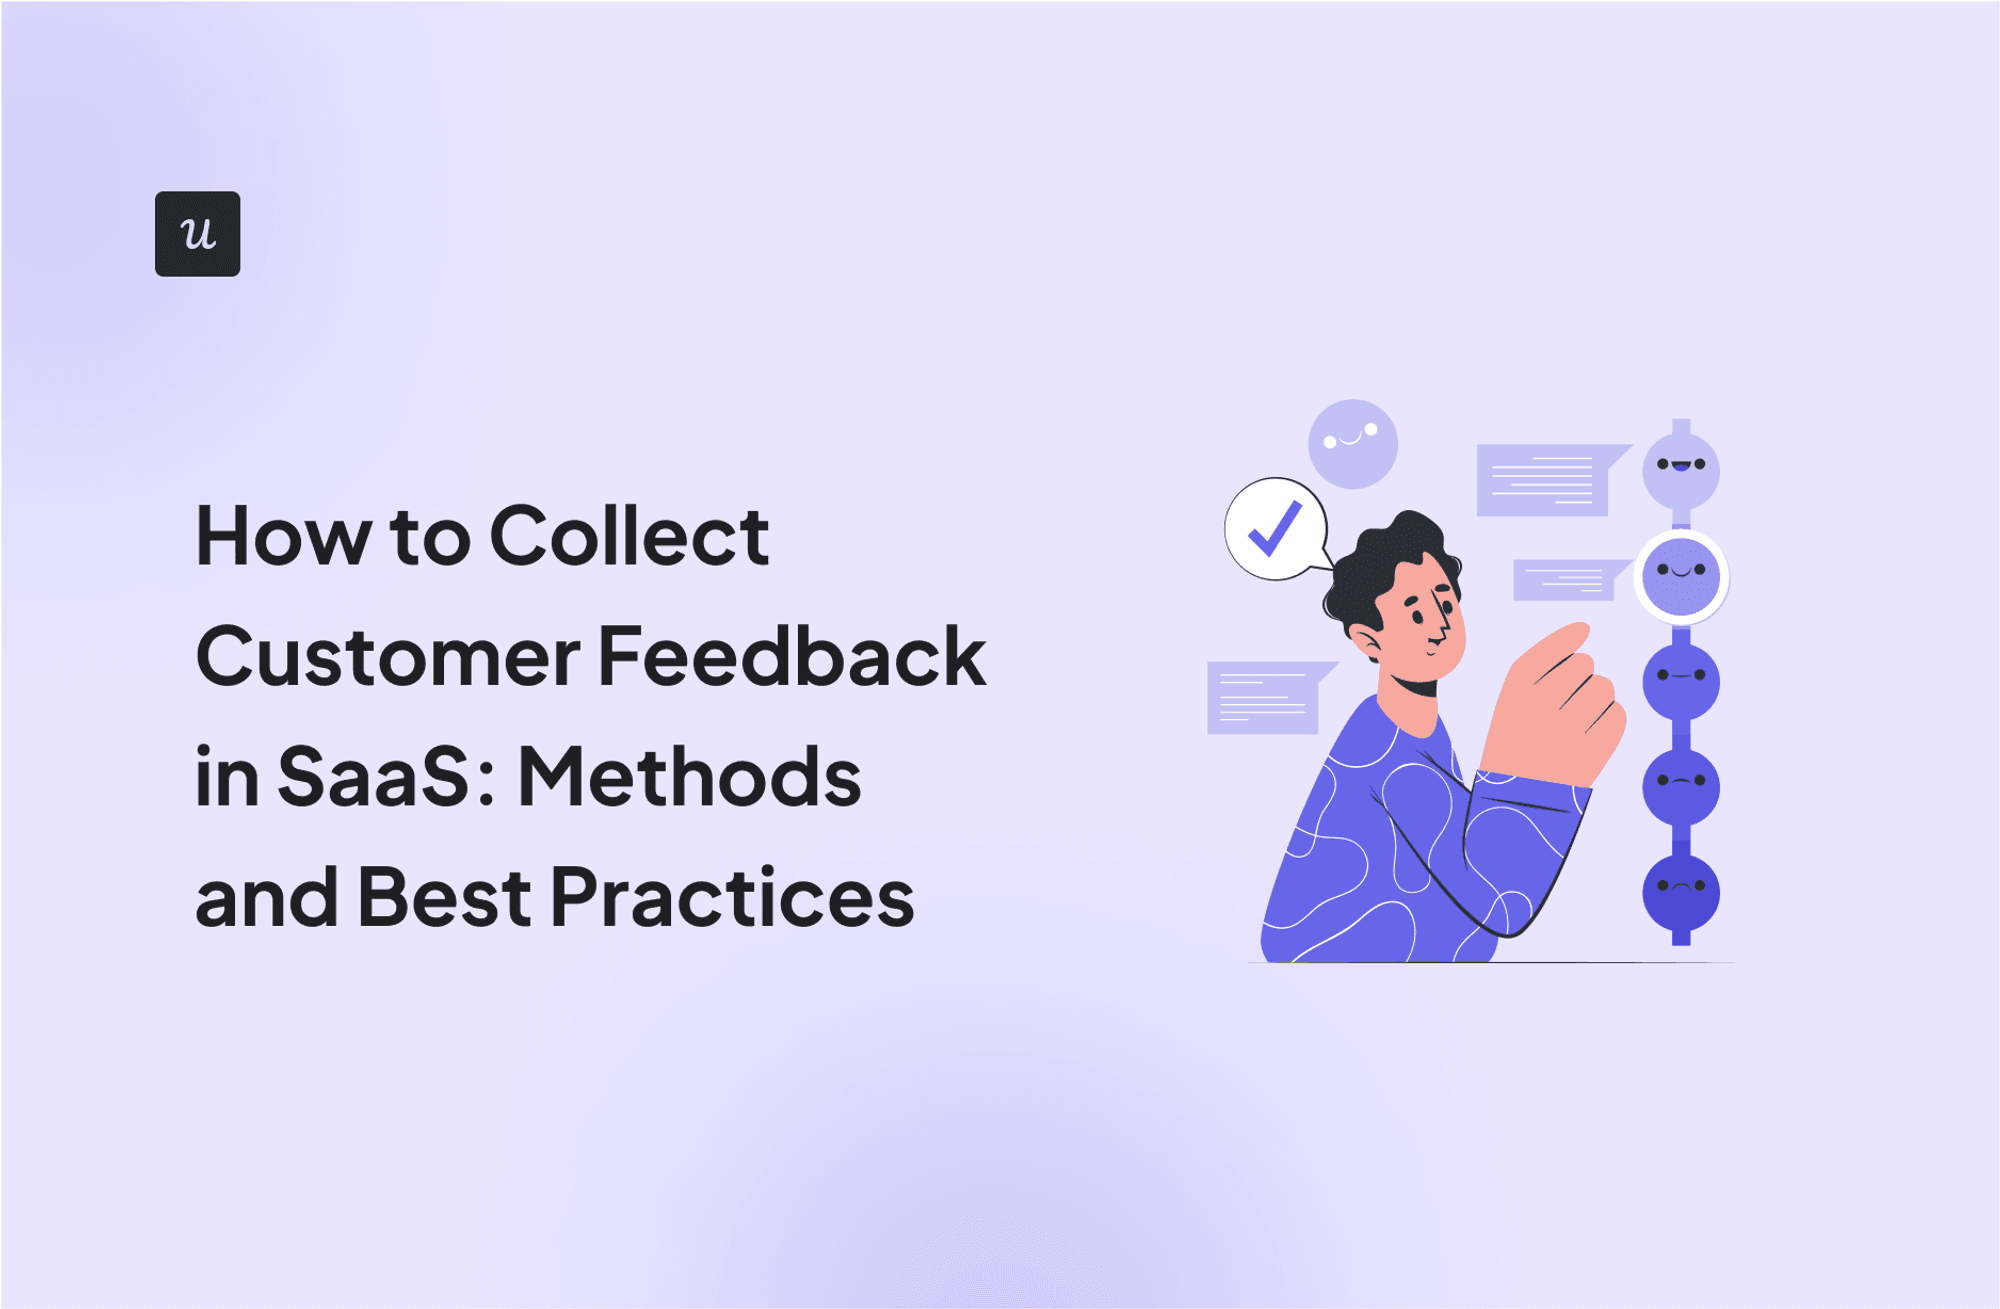 How to Collect Customer Feedback in SaaS: Methods and Best Practices cover